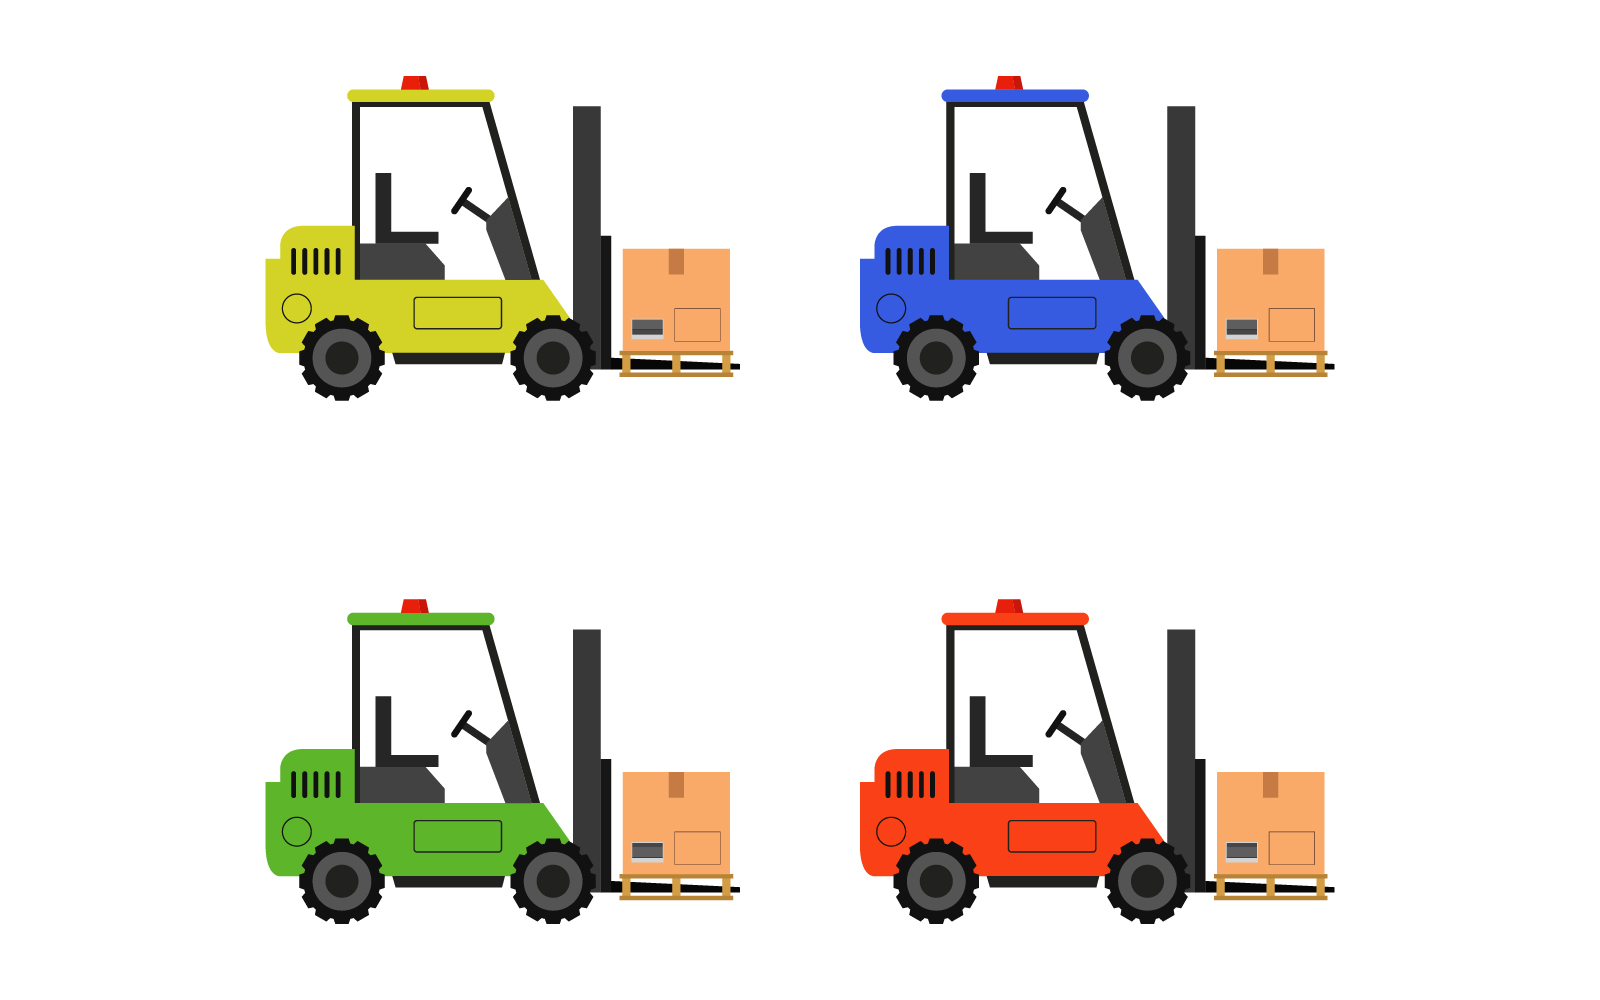 Forklift illustrated and colored in vector on a white background